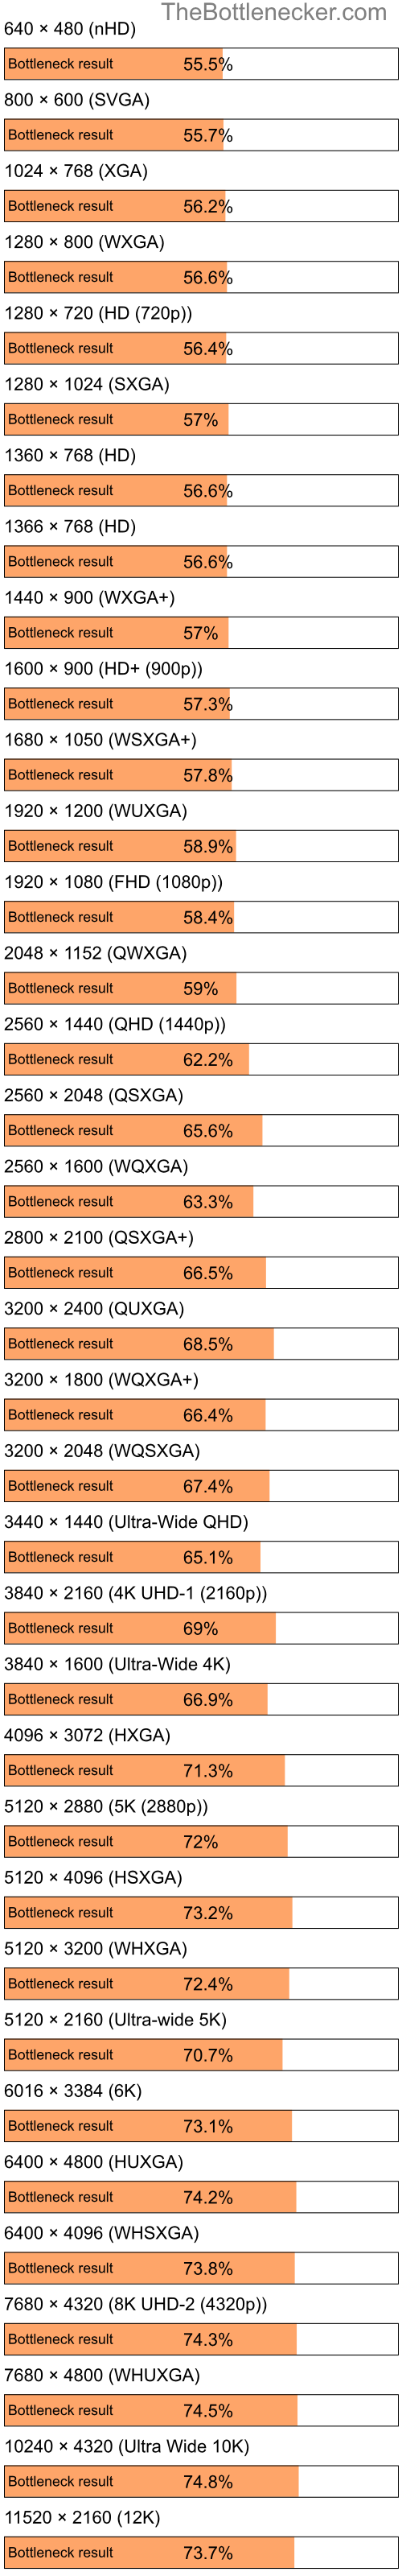 Bottleneck results by resolution for Intel Pentium 4 and NVIDIA Quadro FX 3000 in Processor Intense Tasks